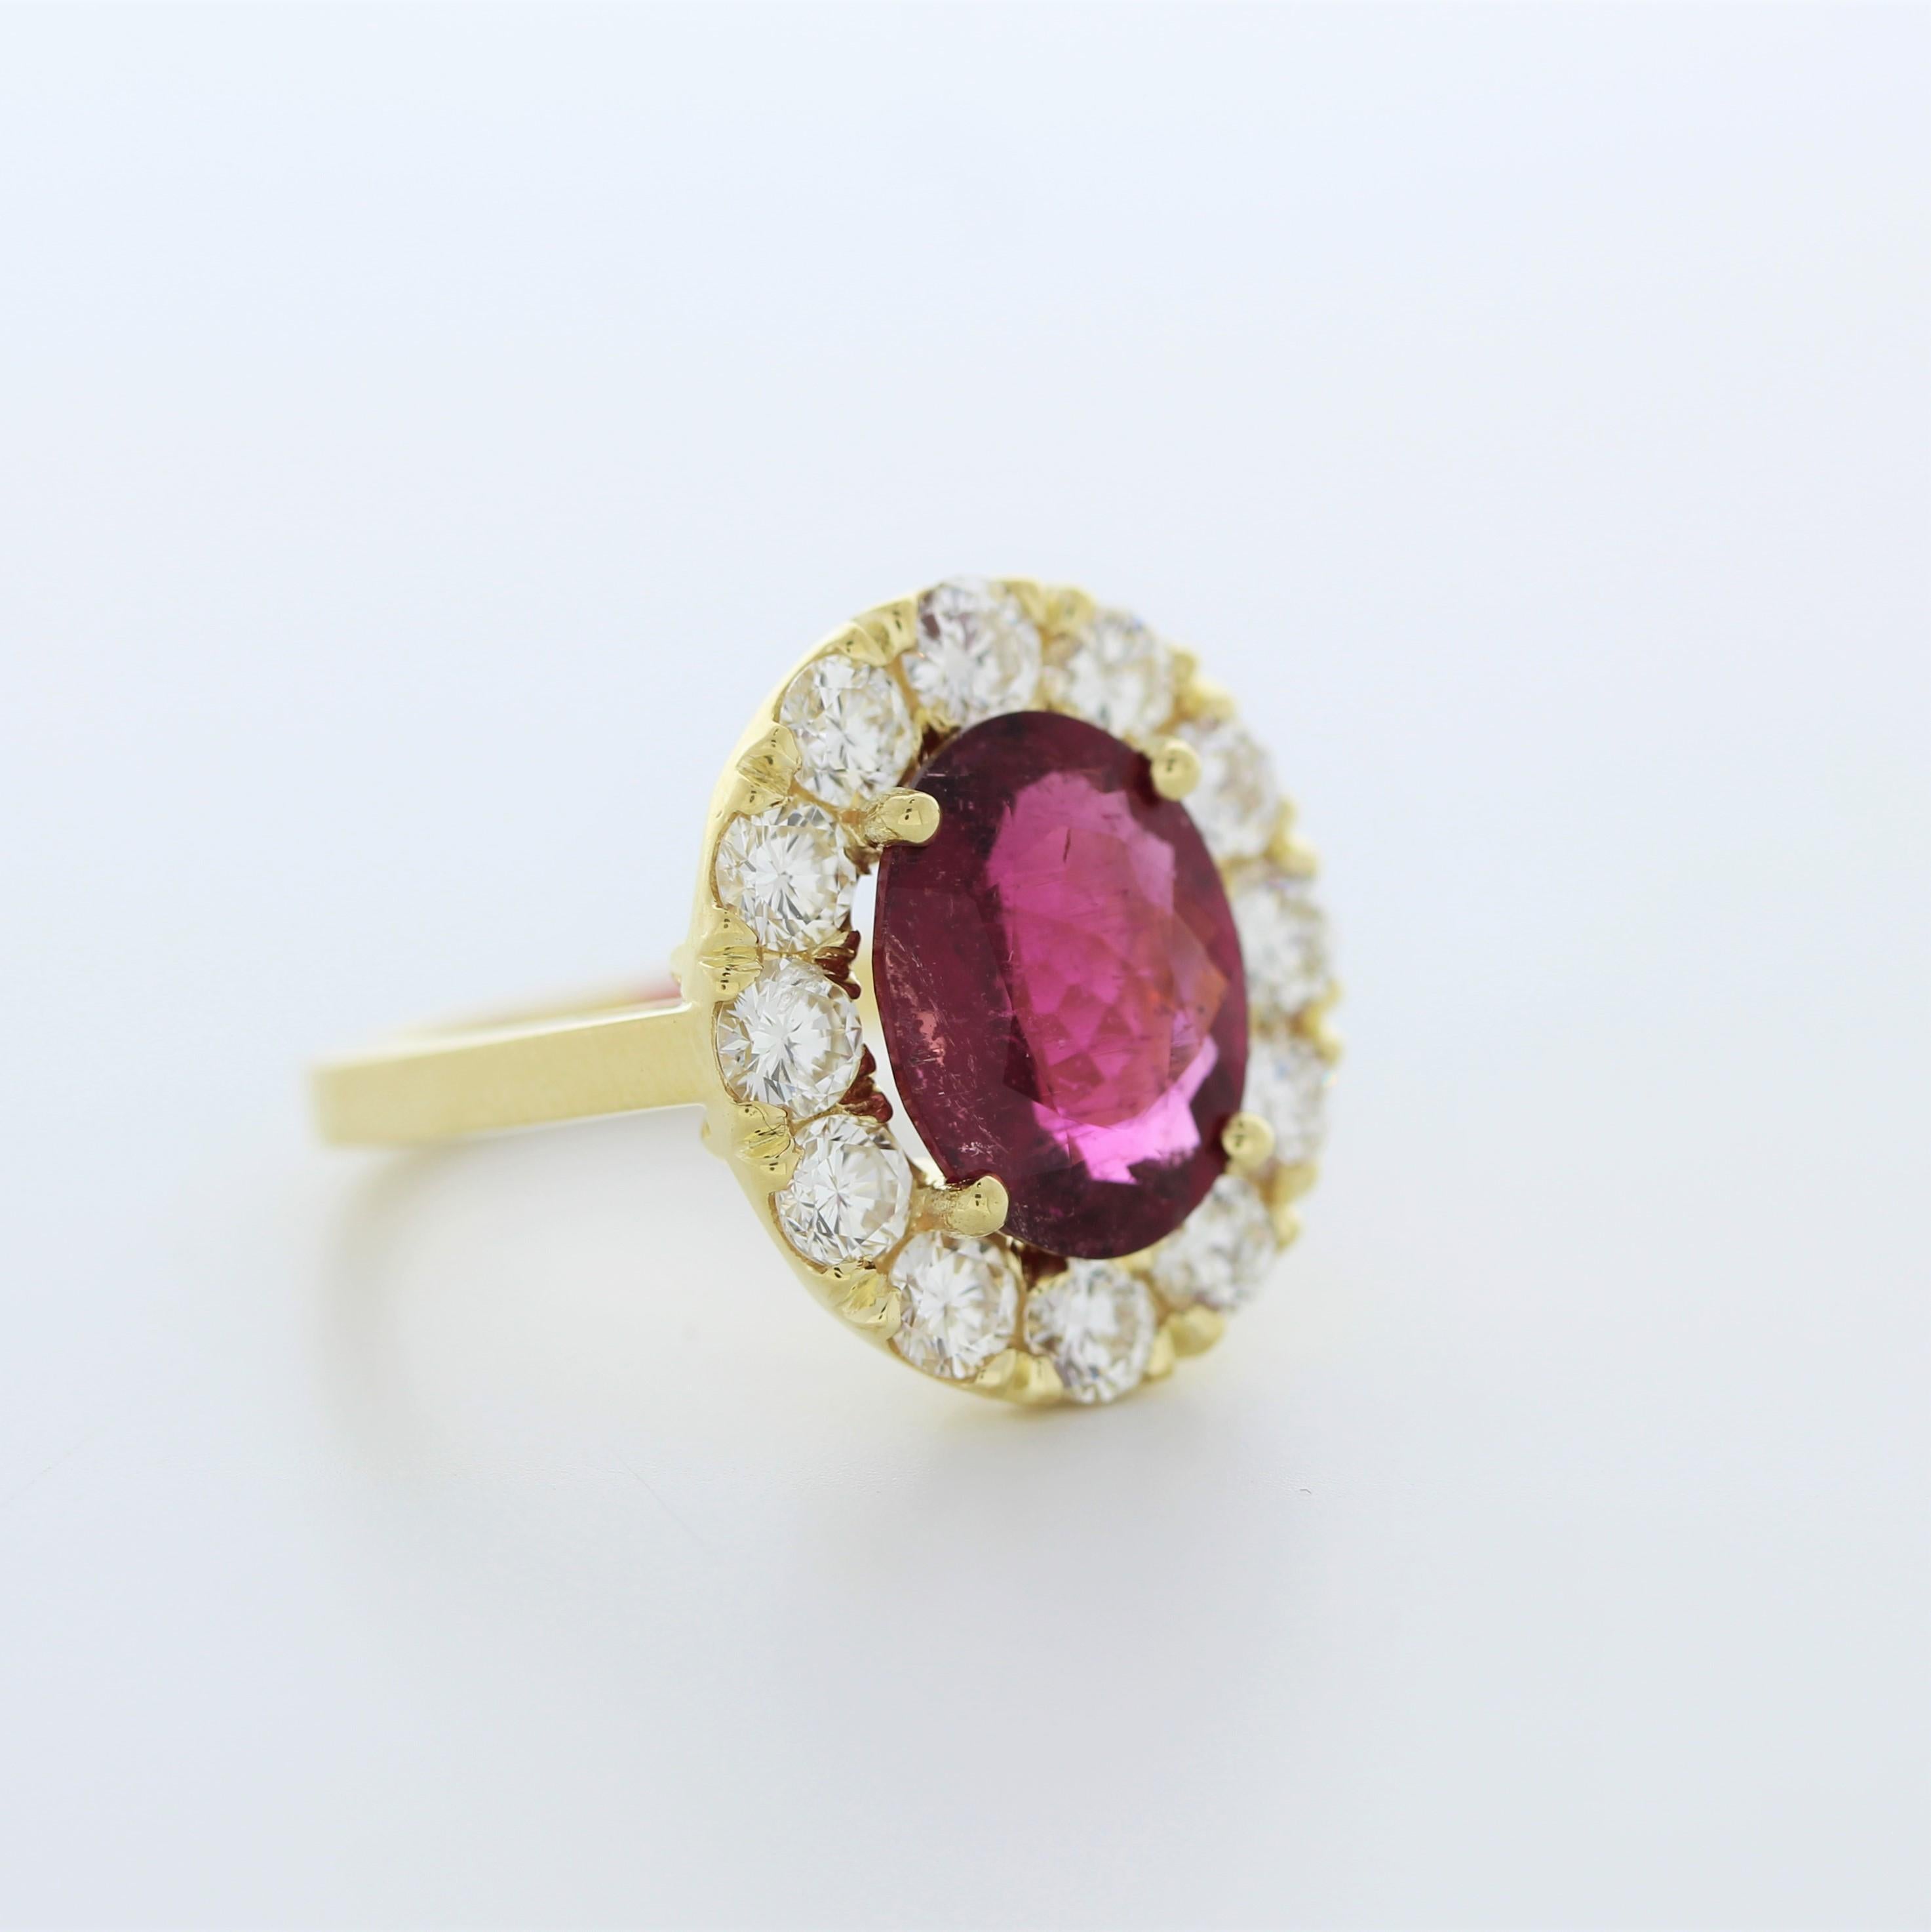 The fashion ring features a 3.48-carat oval-cut rubellite gemstone set in 18 karat yellow gold, accented by 12 round-cut diamonds with a total weight of 1.7 carats. The combination of the vibrant rubellite and sparkling diamonds against the yellow